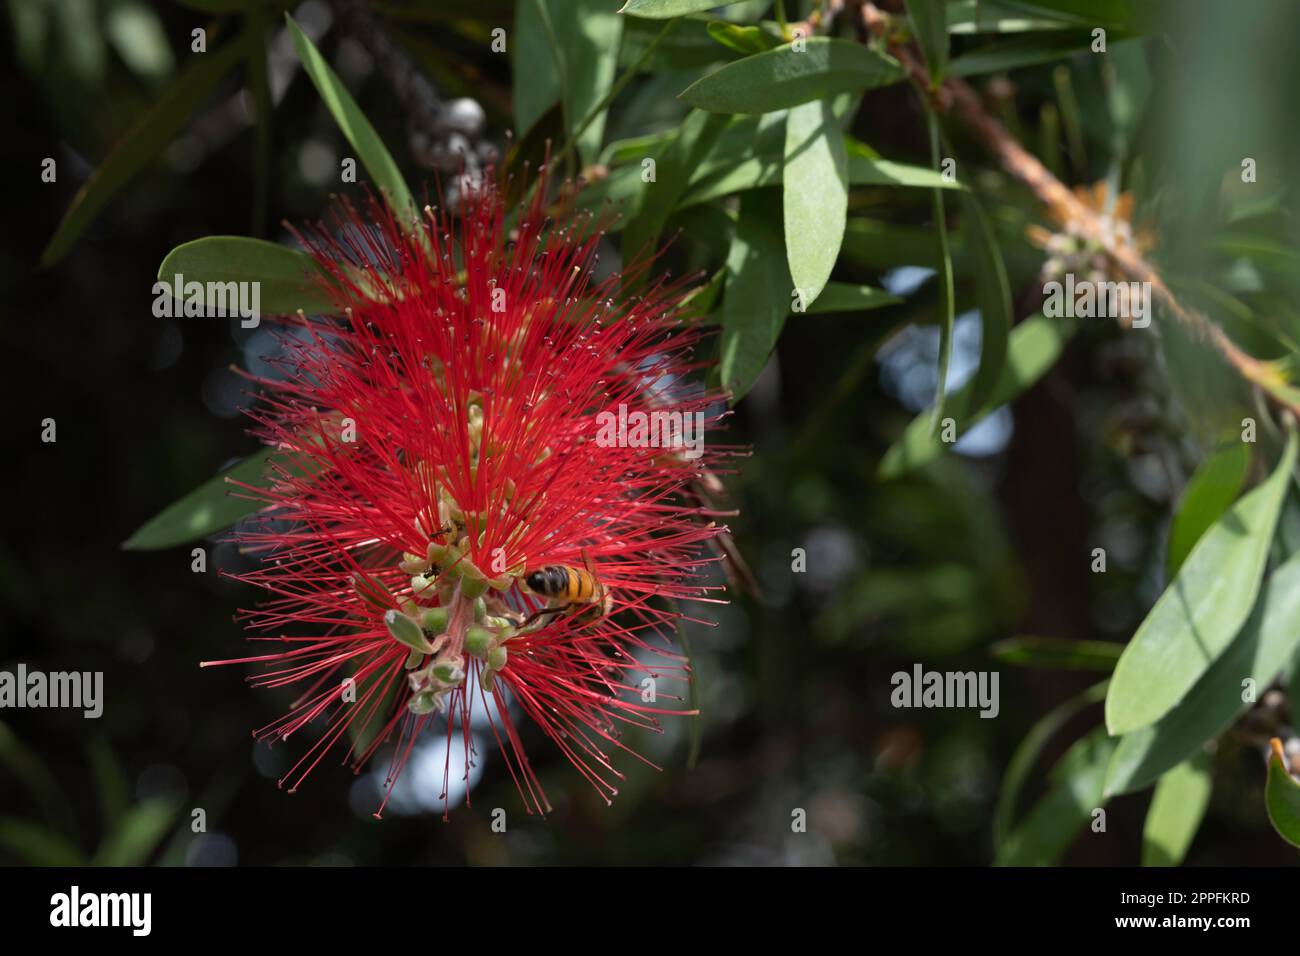 Common red bottlebrush or Melaleuca citrina with some buds yet to bloom and a bee on it, in Melbourne, Australia Stock Photo